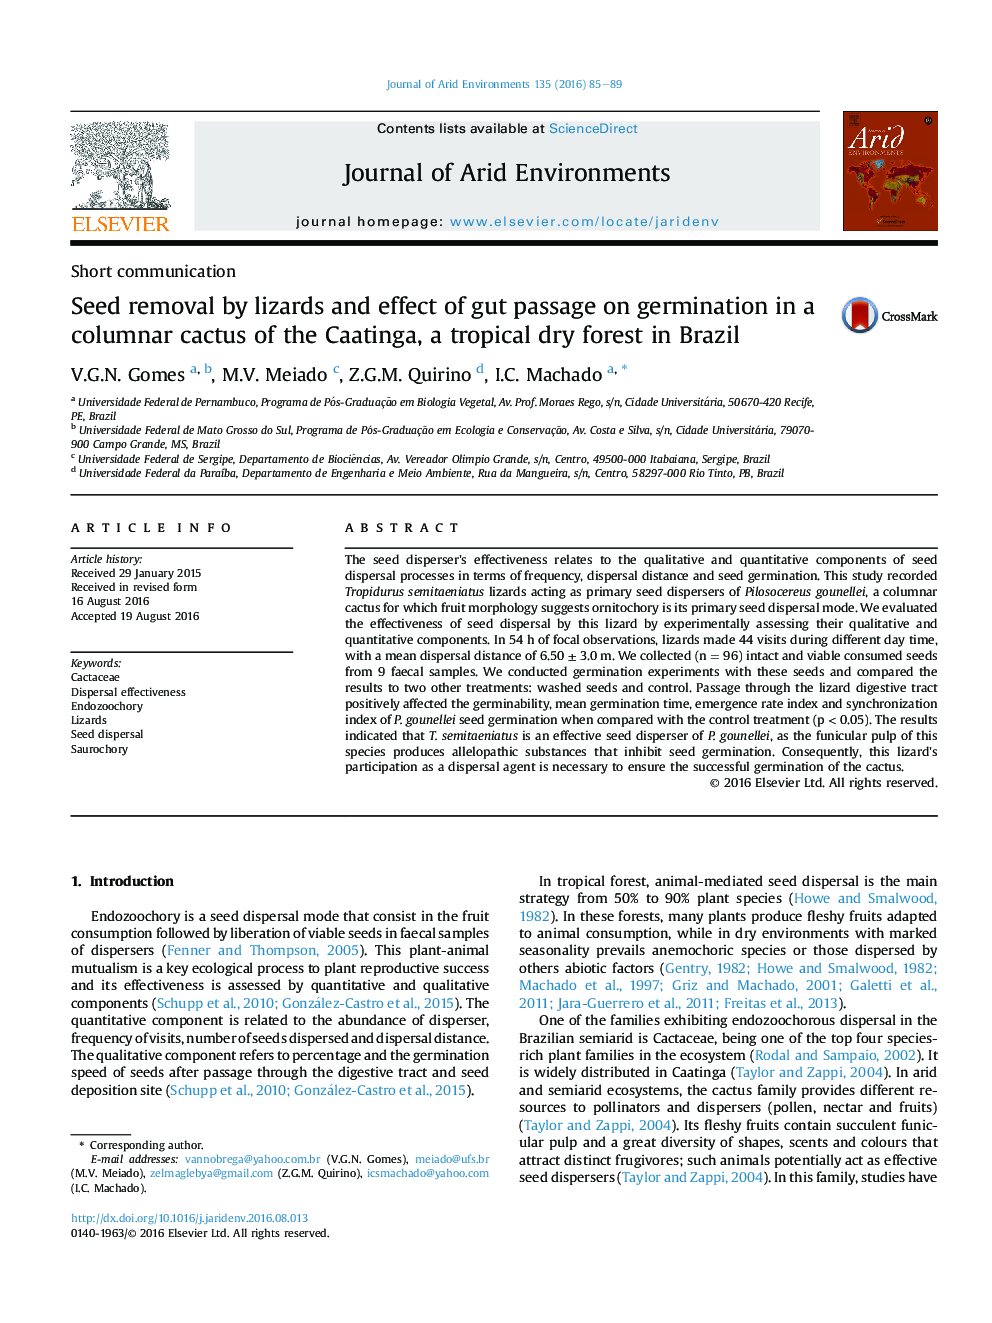 Seed removal by lizards and effect of gut passage on germination in a columnar cactus of the Caatinga, a tropical dry forest in Brazil